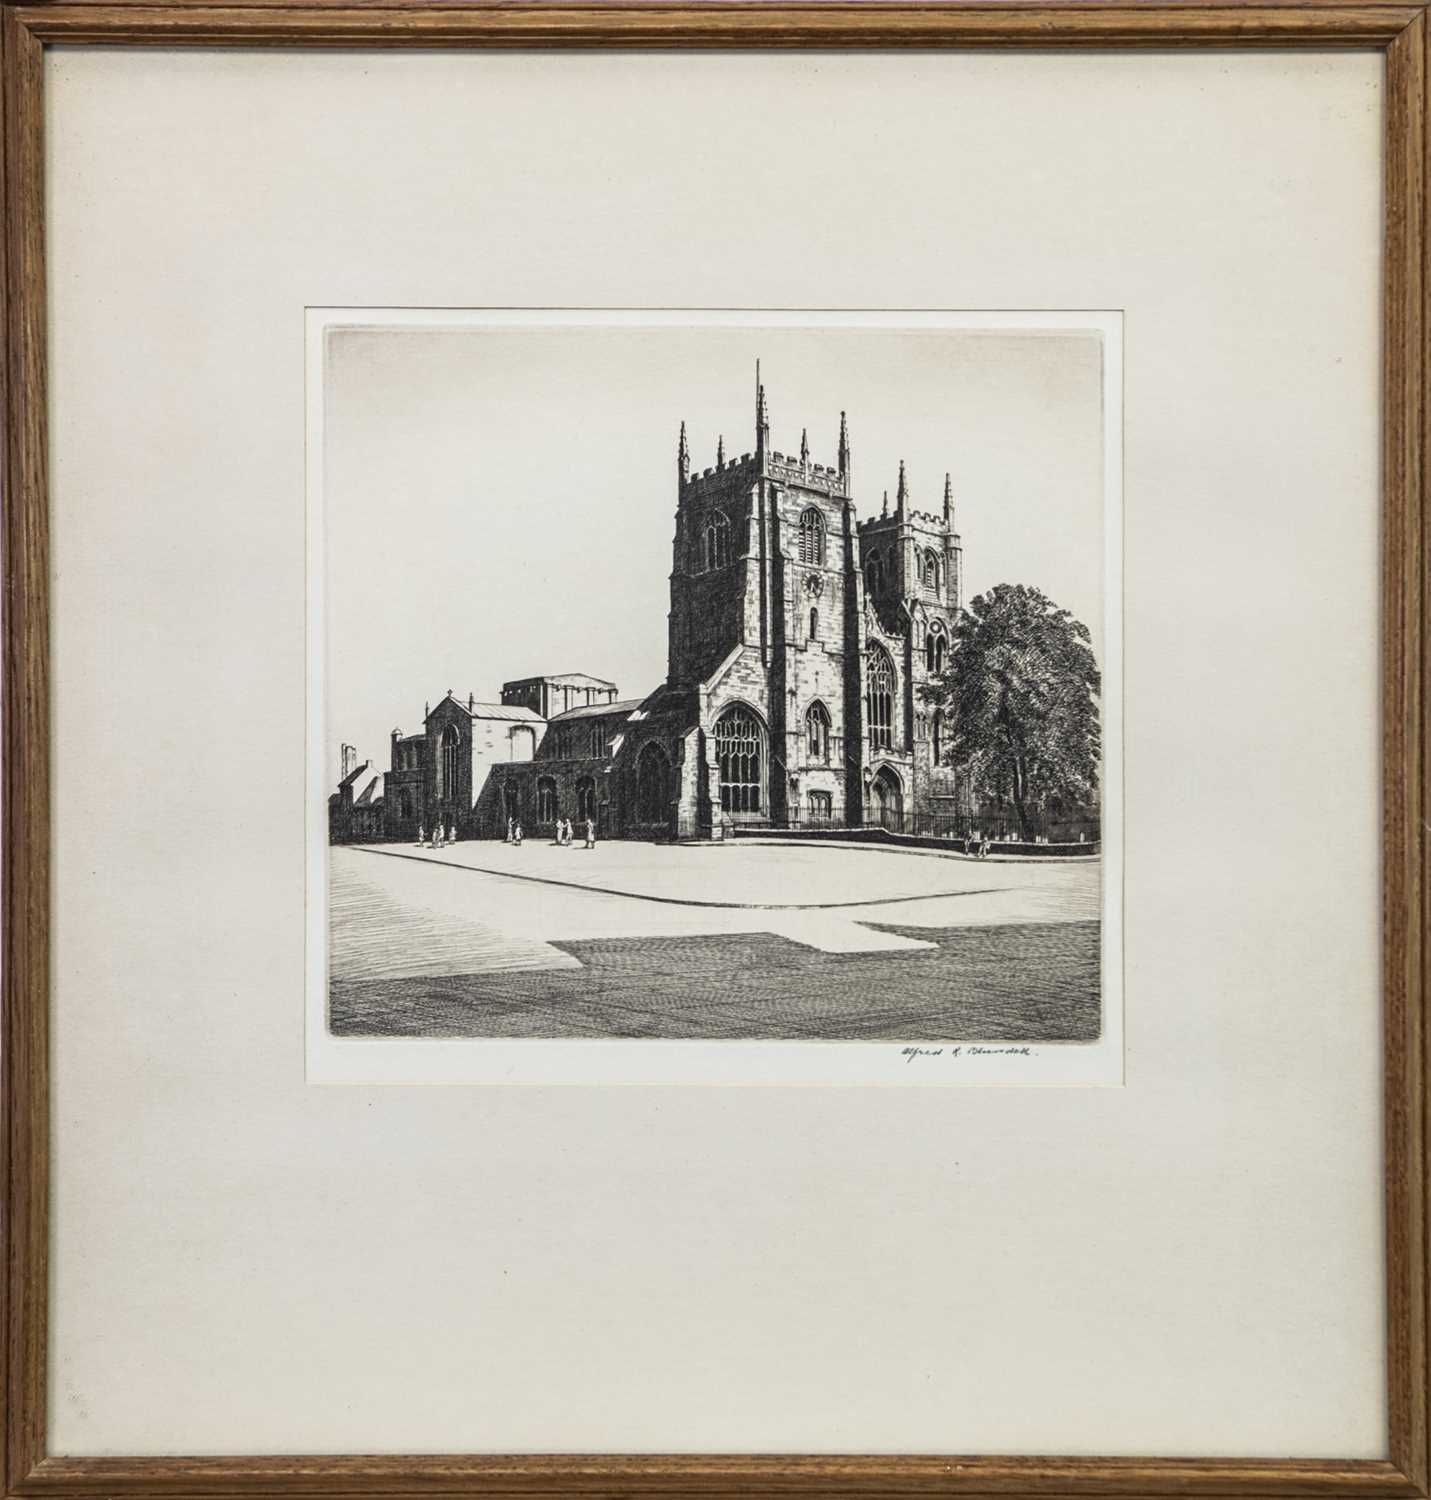 Lot 405 - VIEW TOWARDS A CHURCH, AN ETCHING BY ALFRED RICHARD BLUNDELL